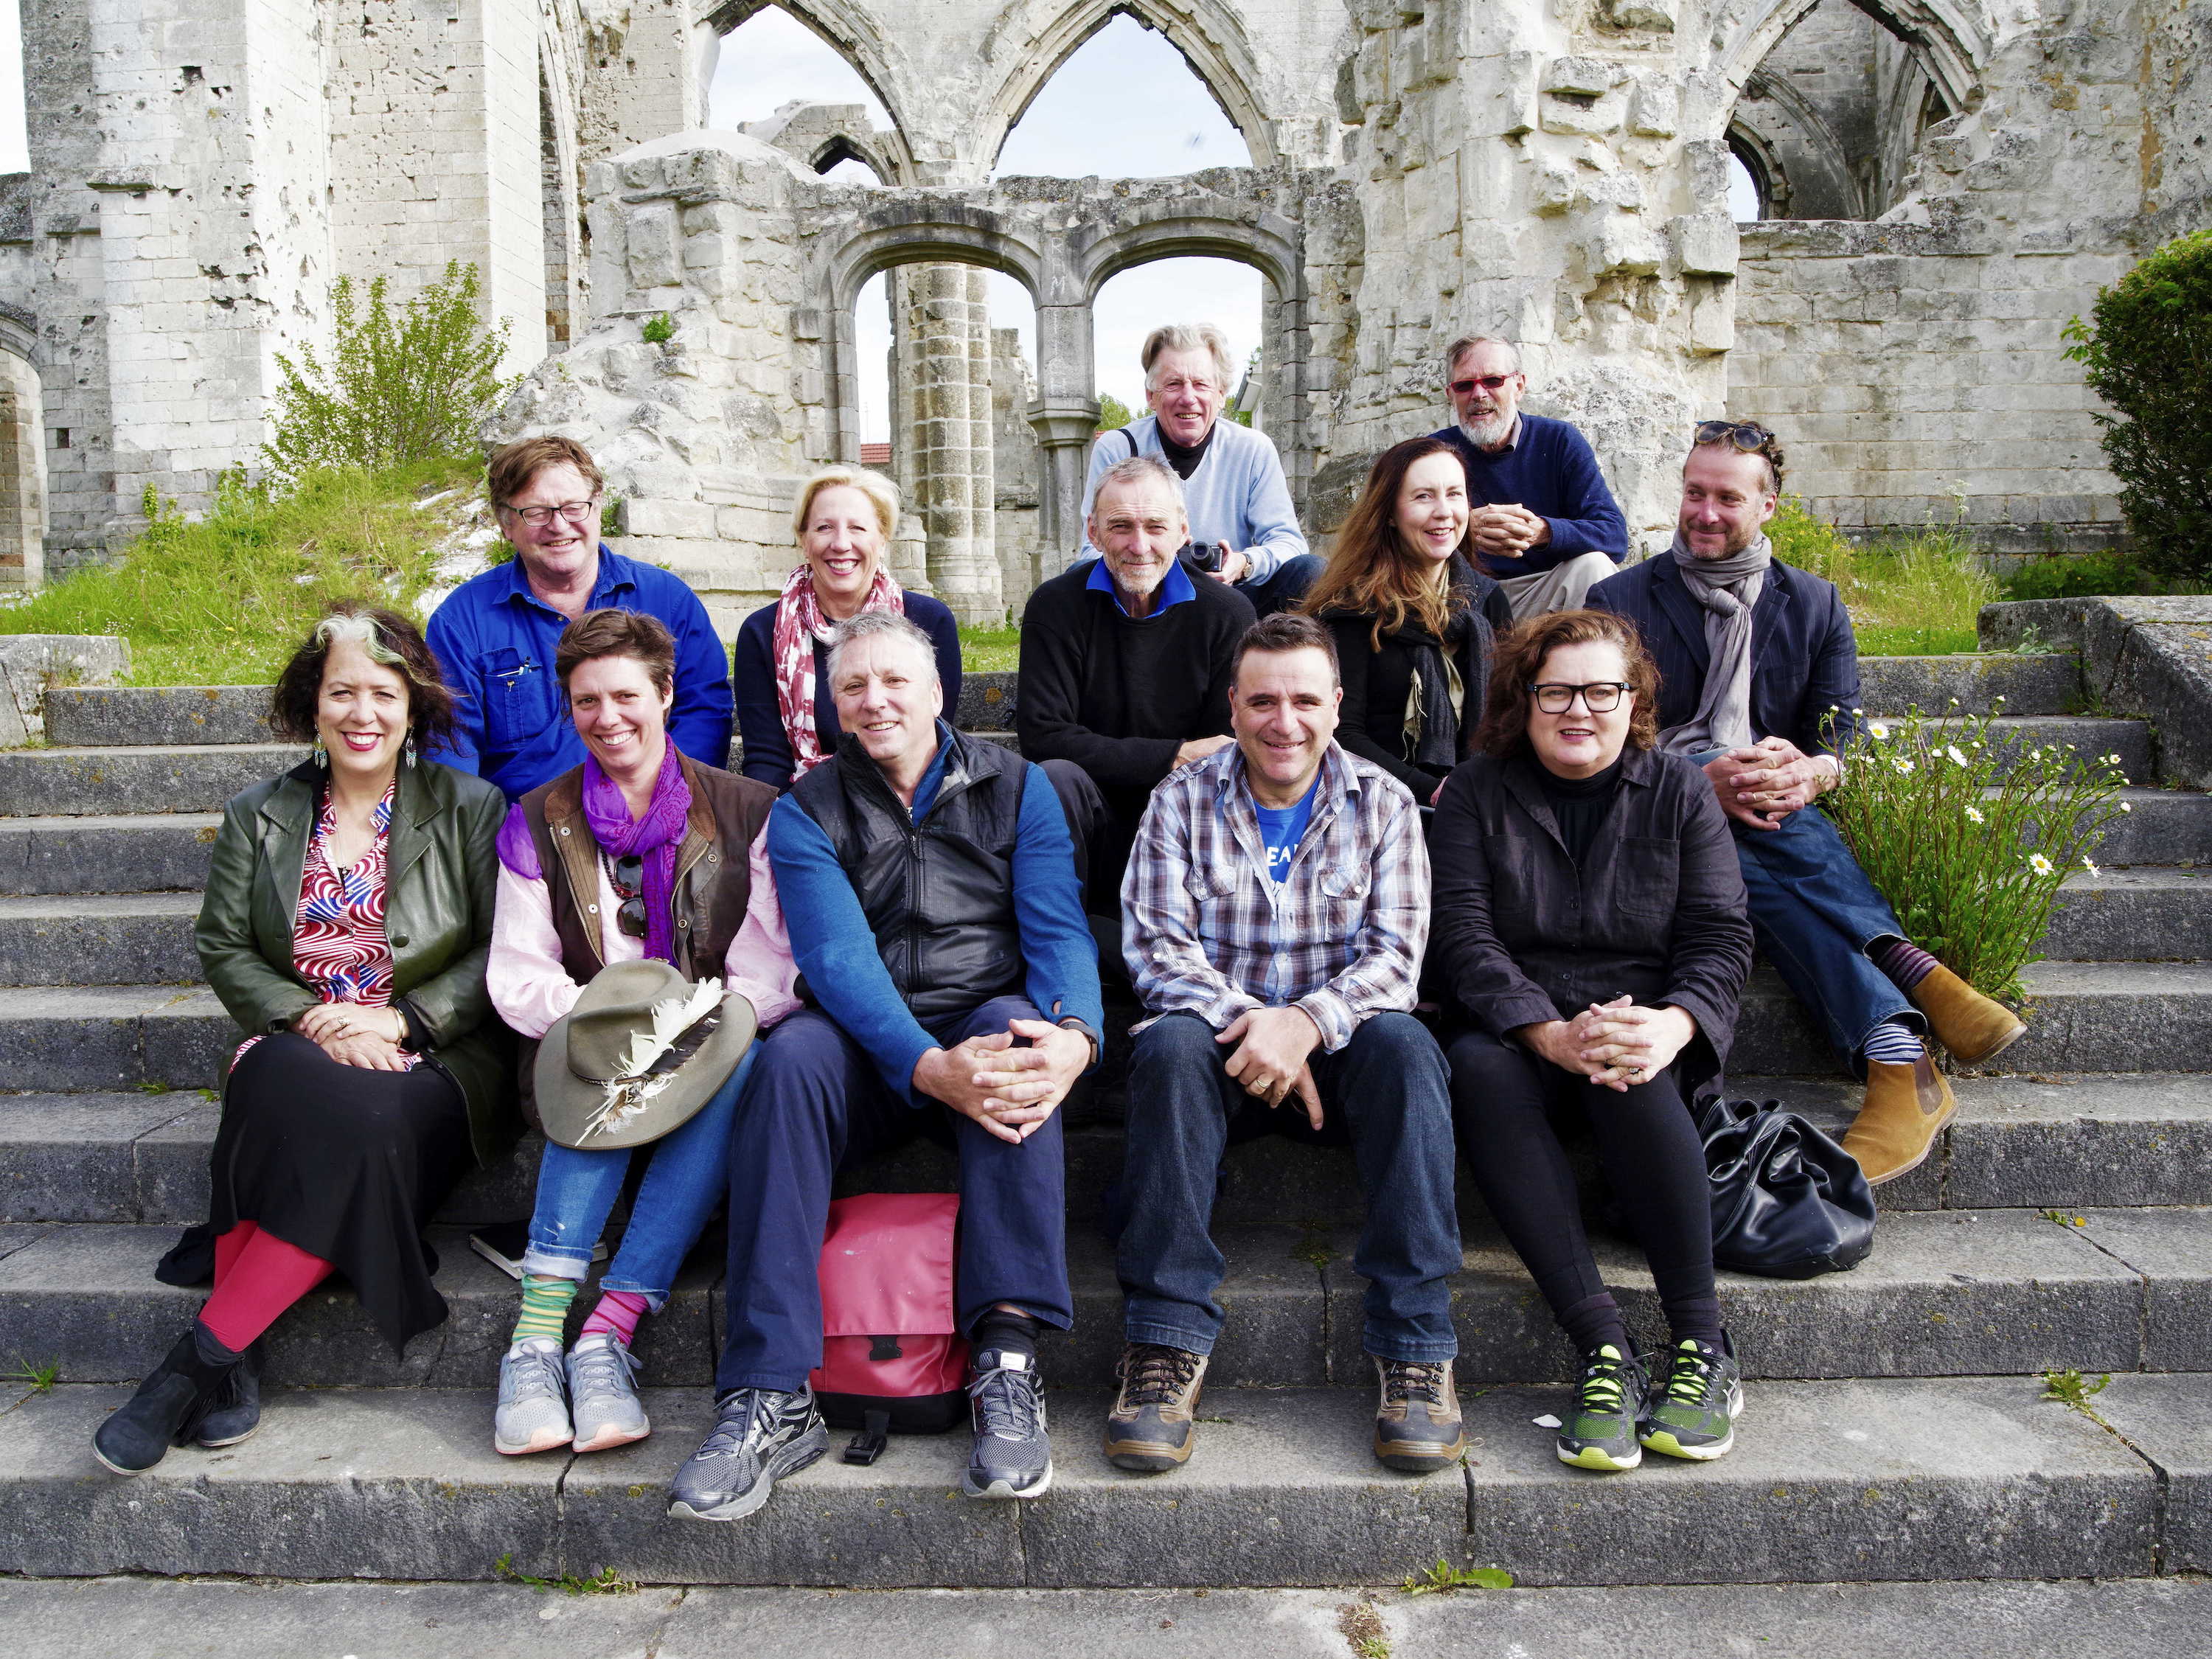 The exhibition artists. (Front row left to right) Wendy Sharpe, Harrie Fasher, Euan Macleod, Steve Lopes, Amanda Penrose Hart (Middle Row left to right) Ian Marr, Deirdre Bean, Ross Laurie, Michelle Hiscock, Luke Scibberas (Back Row left to right) Paul Ferman, Idris Murphy. Photograph by Robert Linnegar courtesy of King Street Gallery.